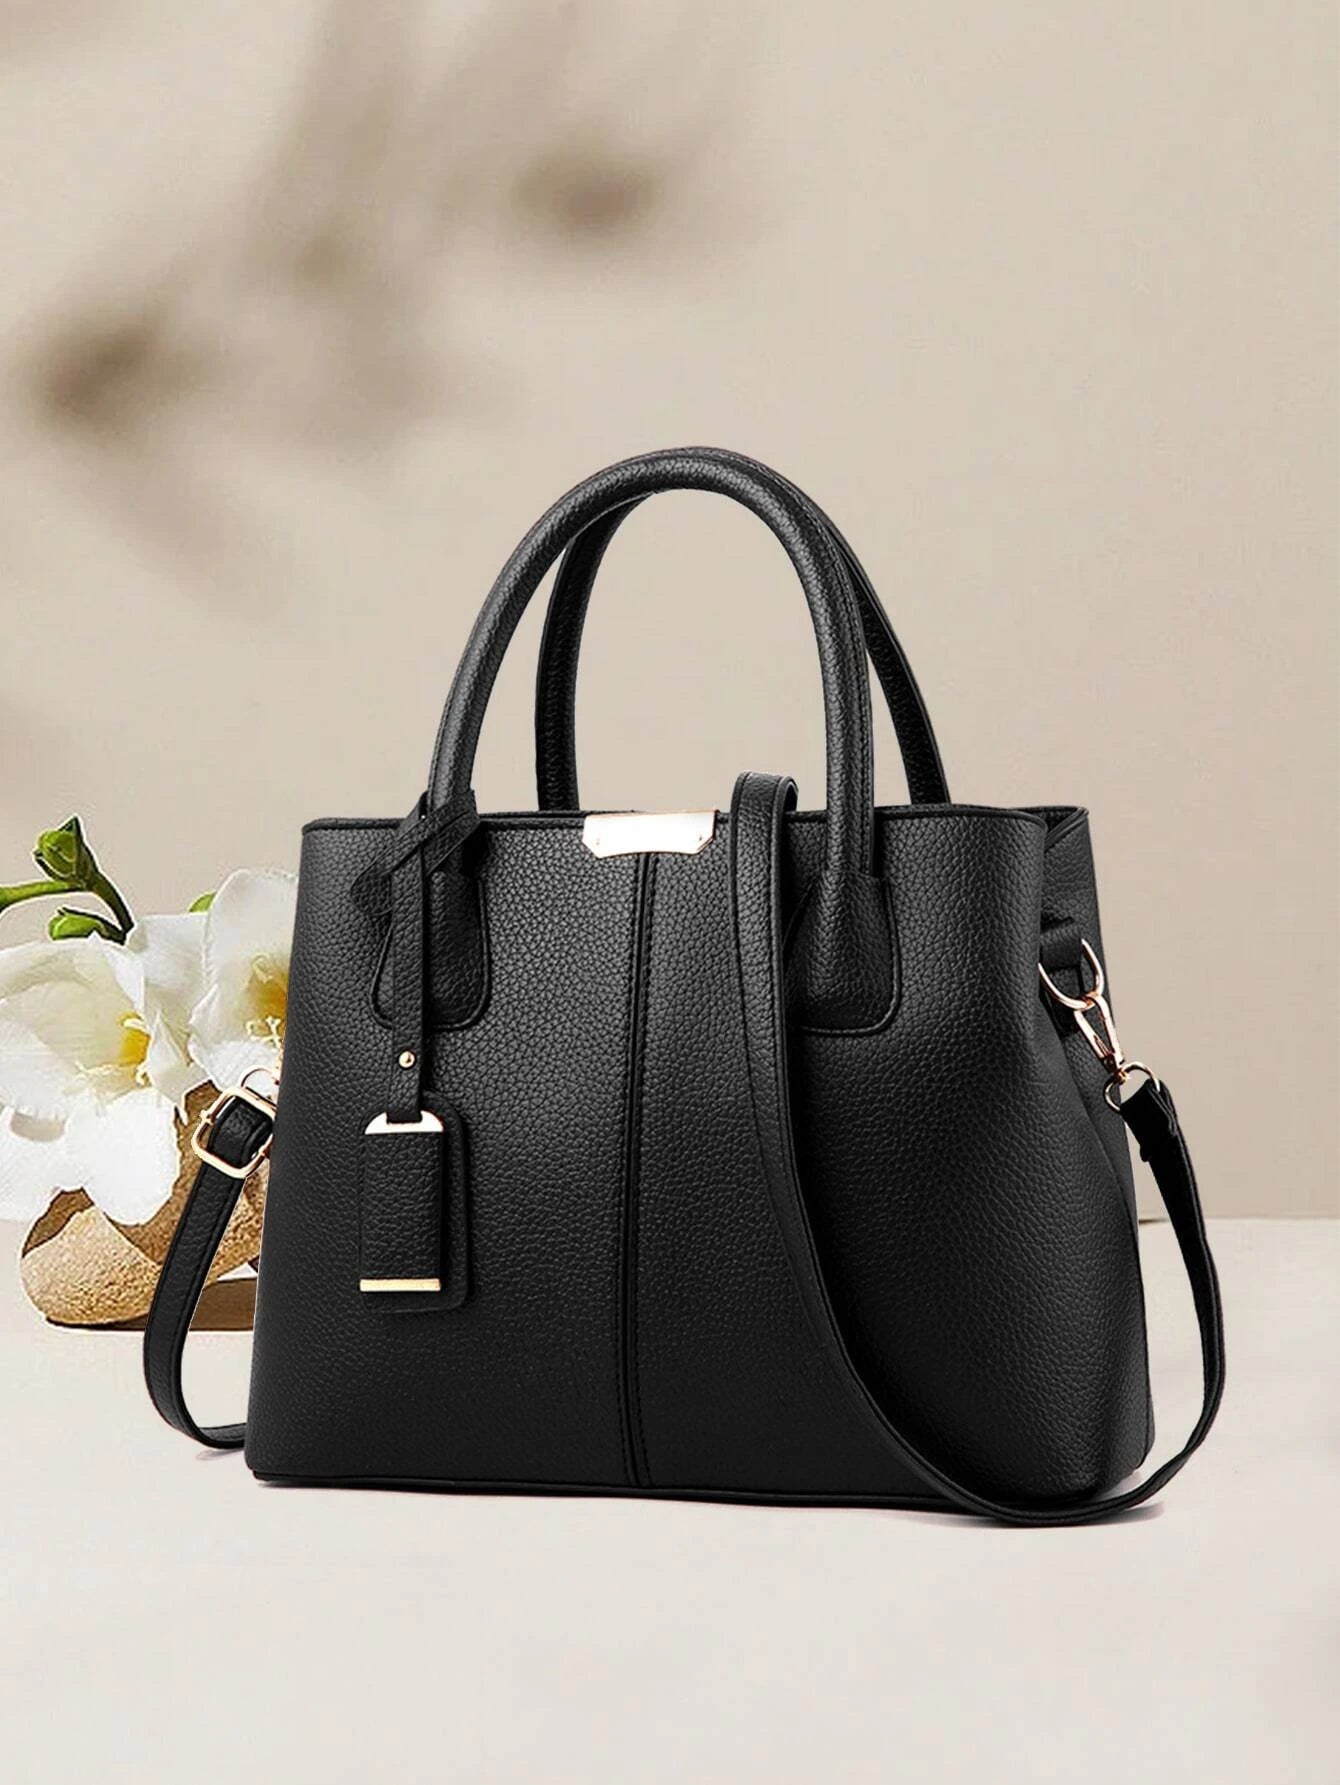 SHEIN Simple Artificial Leather Handbag, Women's Elegant Crossbody Bag With Zipper Stylish, Litchi Embossed Top Handle Bag With Bag Charm